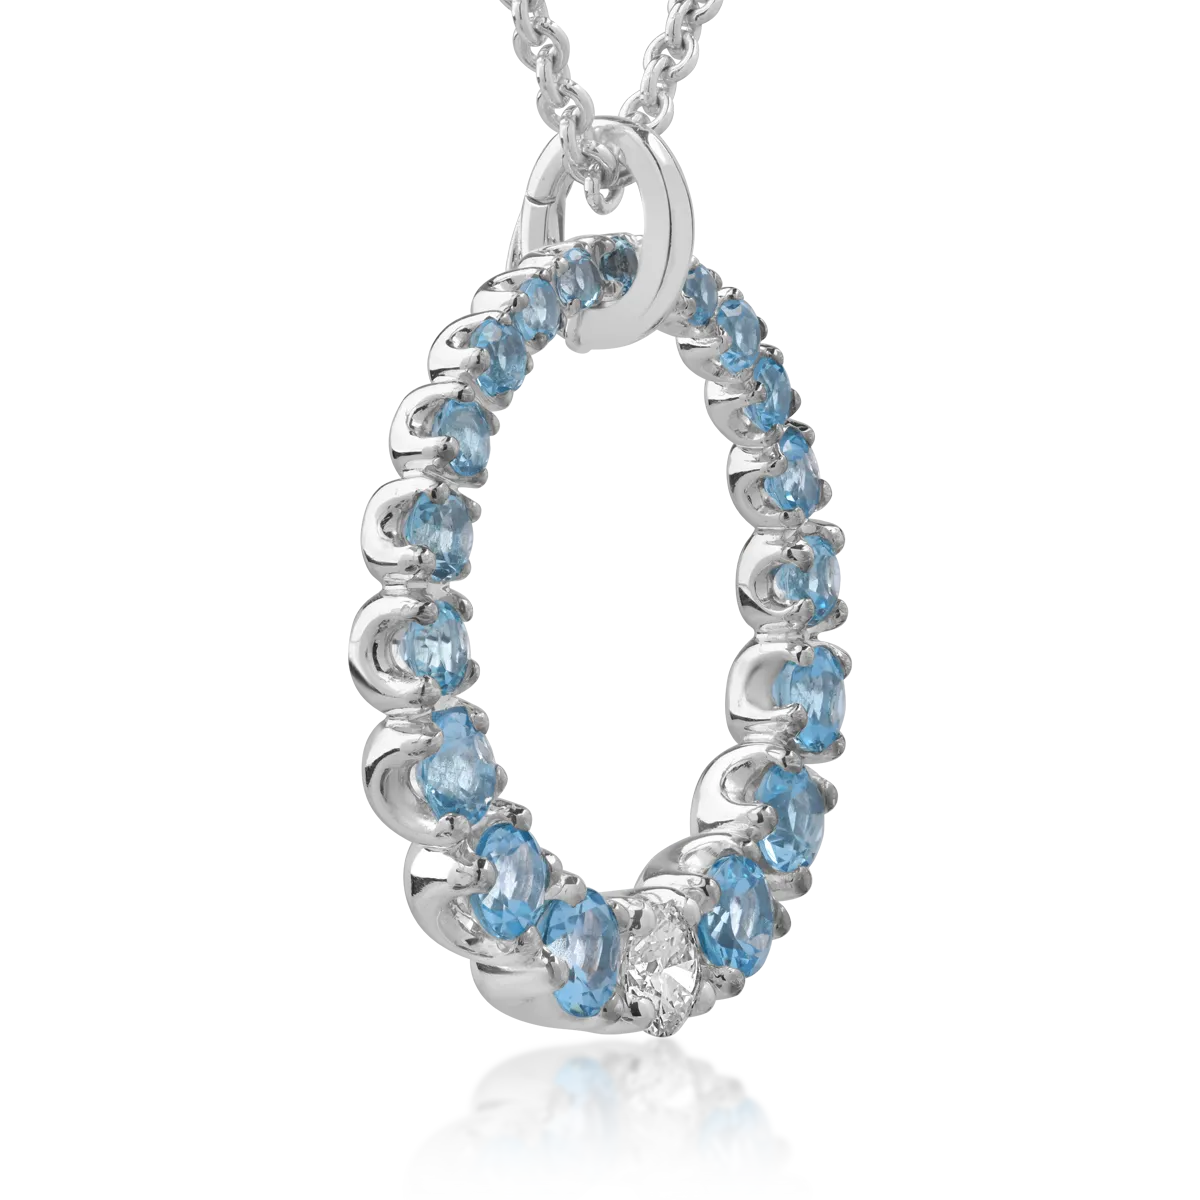 18K white gold pendant necklace with 0.59ct diamond and 4.92ct blue topaz